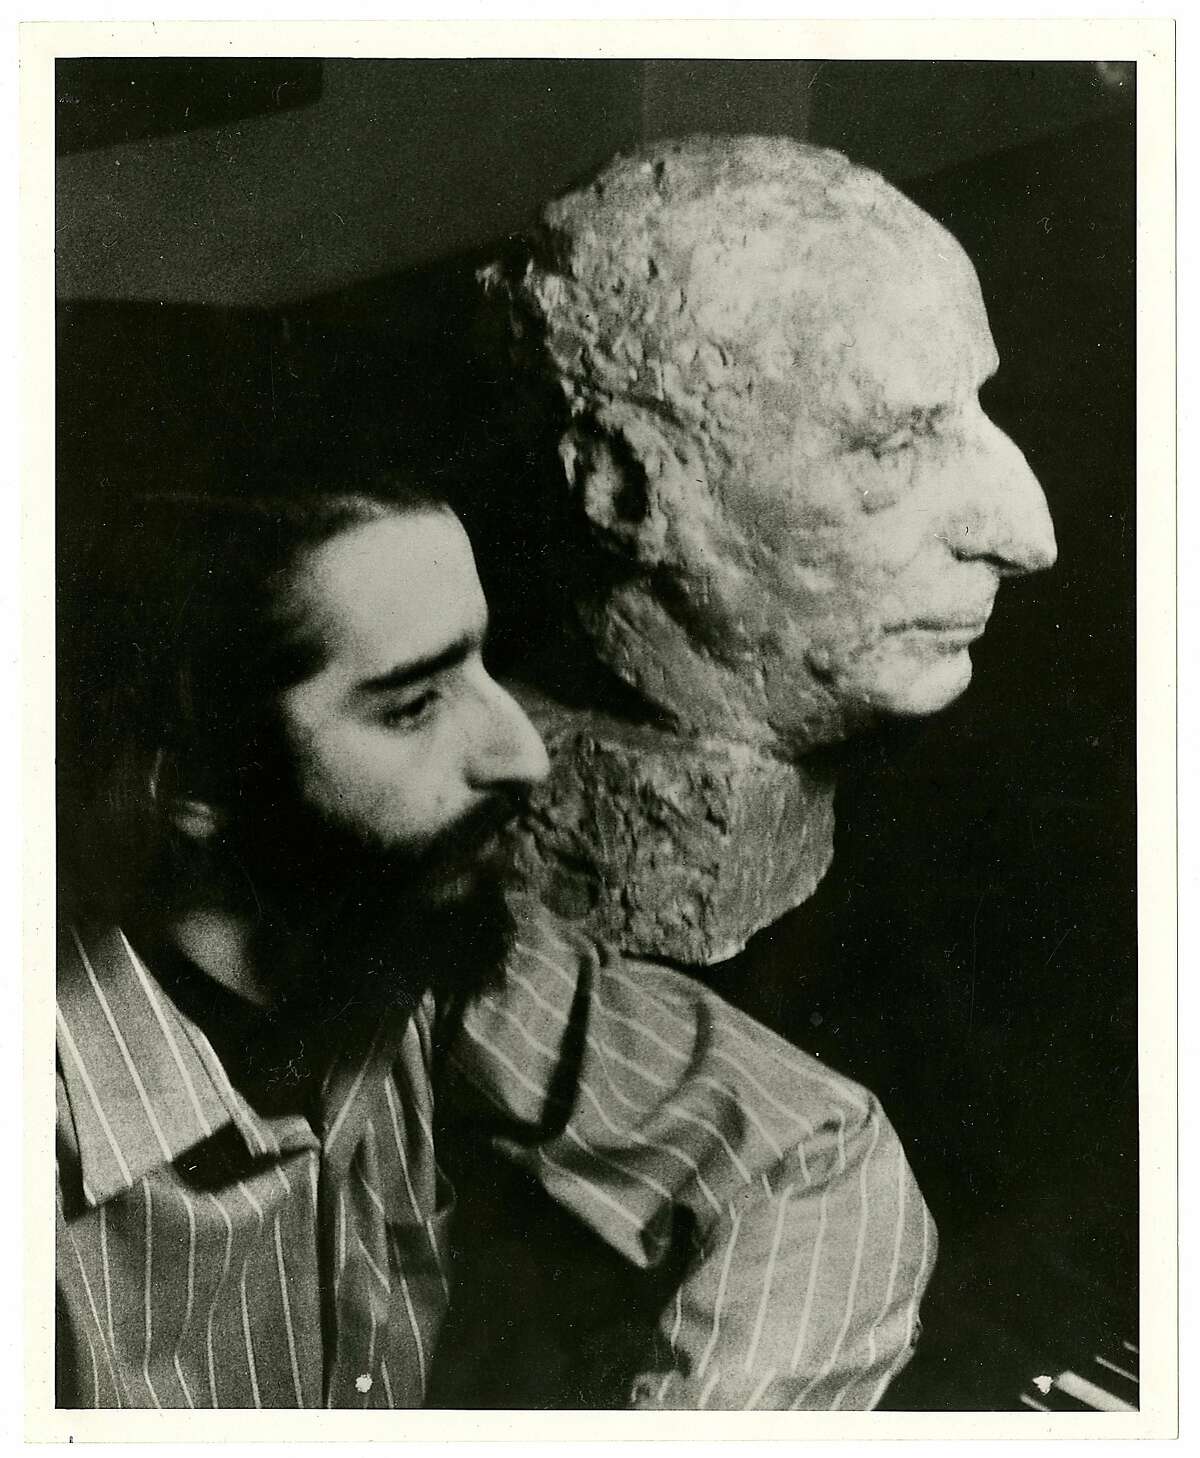 Writer Lawrence Weschler, seen here with a bust of his grandfather, composer Ernst Toch, will introduce his comic version of Toch's� "Geographical Fugue" at Other Minds' Sound Poetry festival.